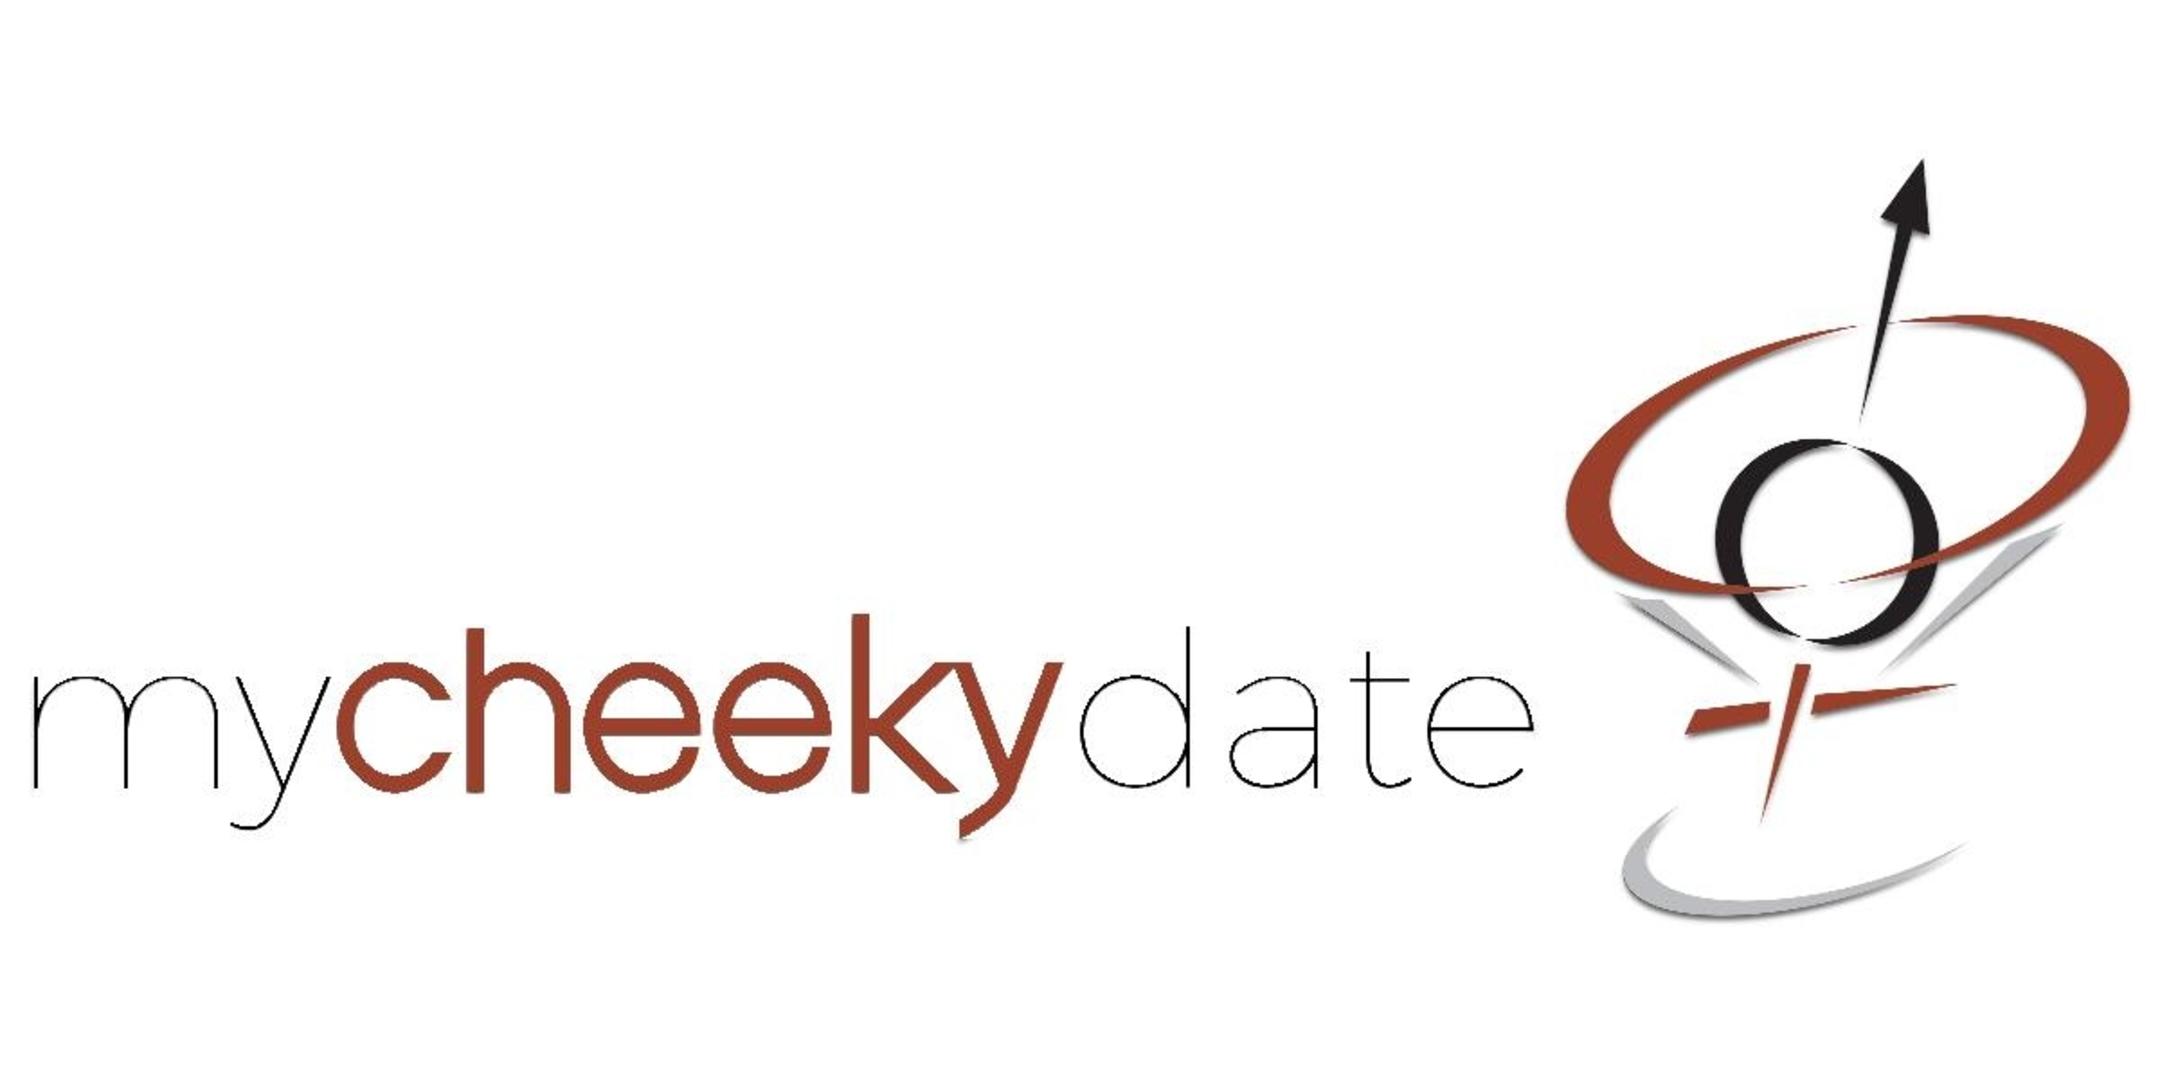 Speed Dating UK Style in Atlanta | Saturday Singles Events | Let's Get Cheeky!